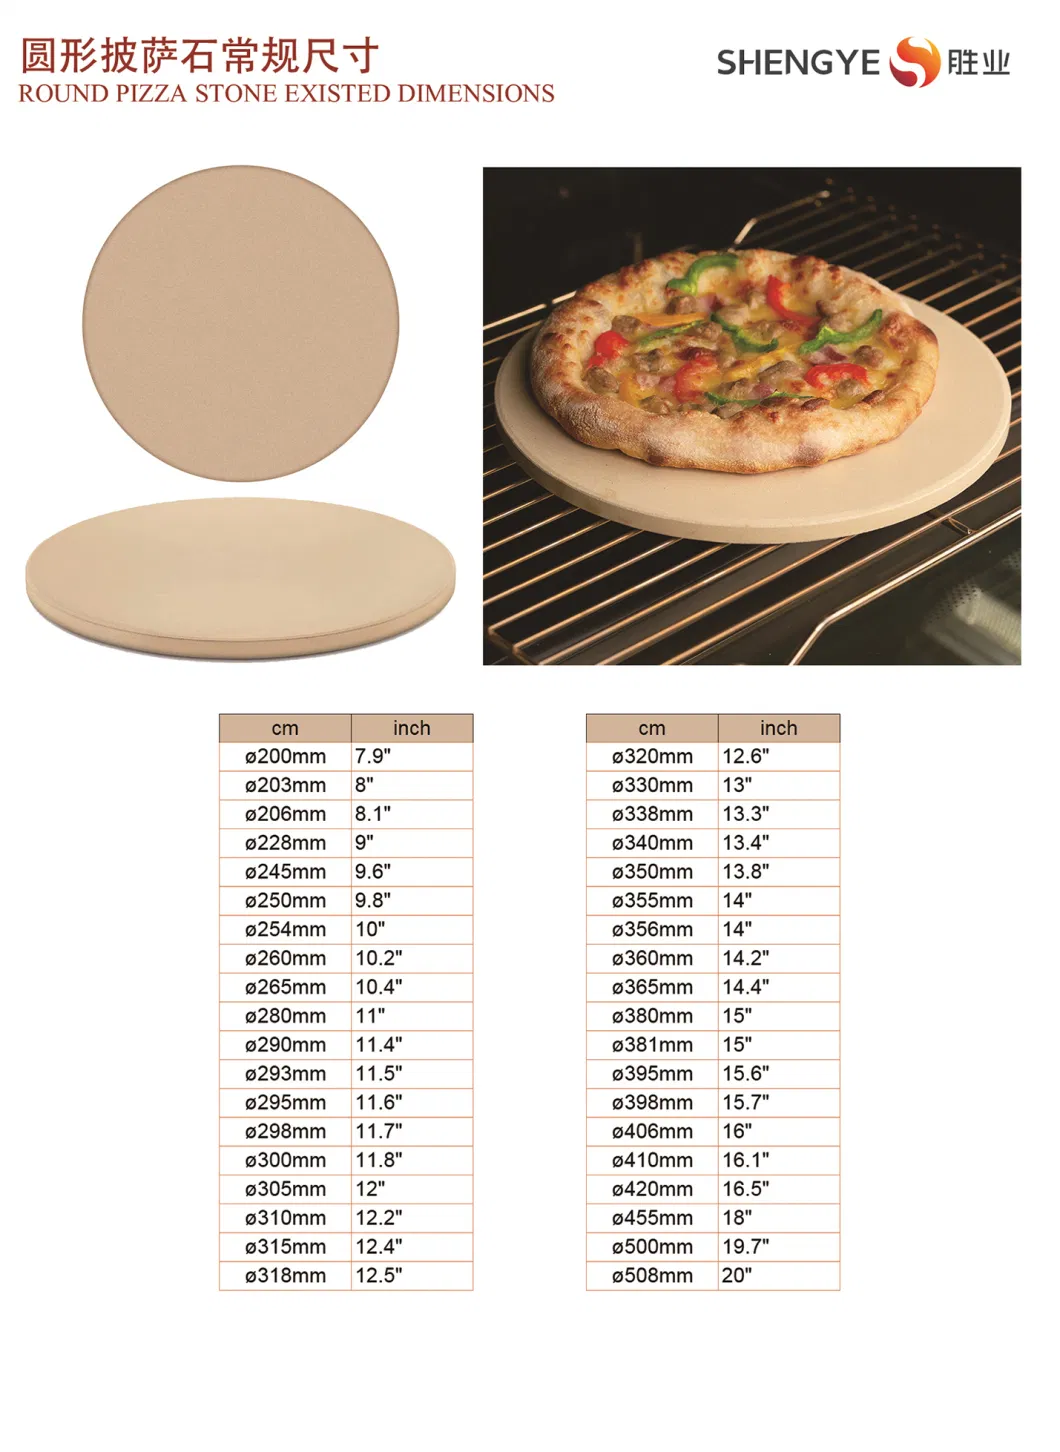 Baking Oven Stone Pizza Serving Plate Ceramic Pizza Baking Pan Frying Pan